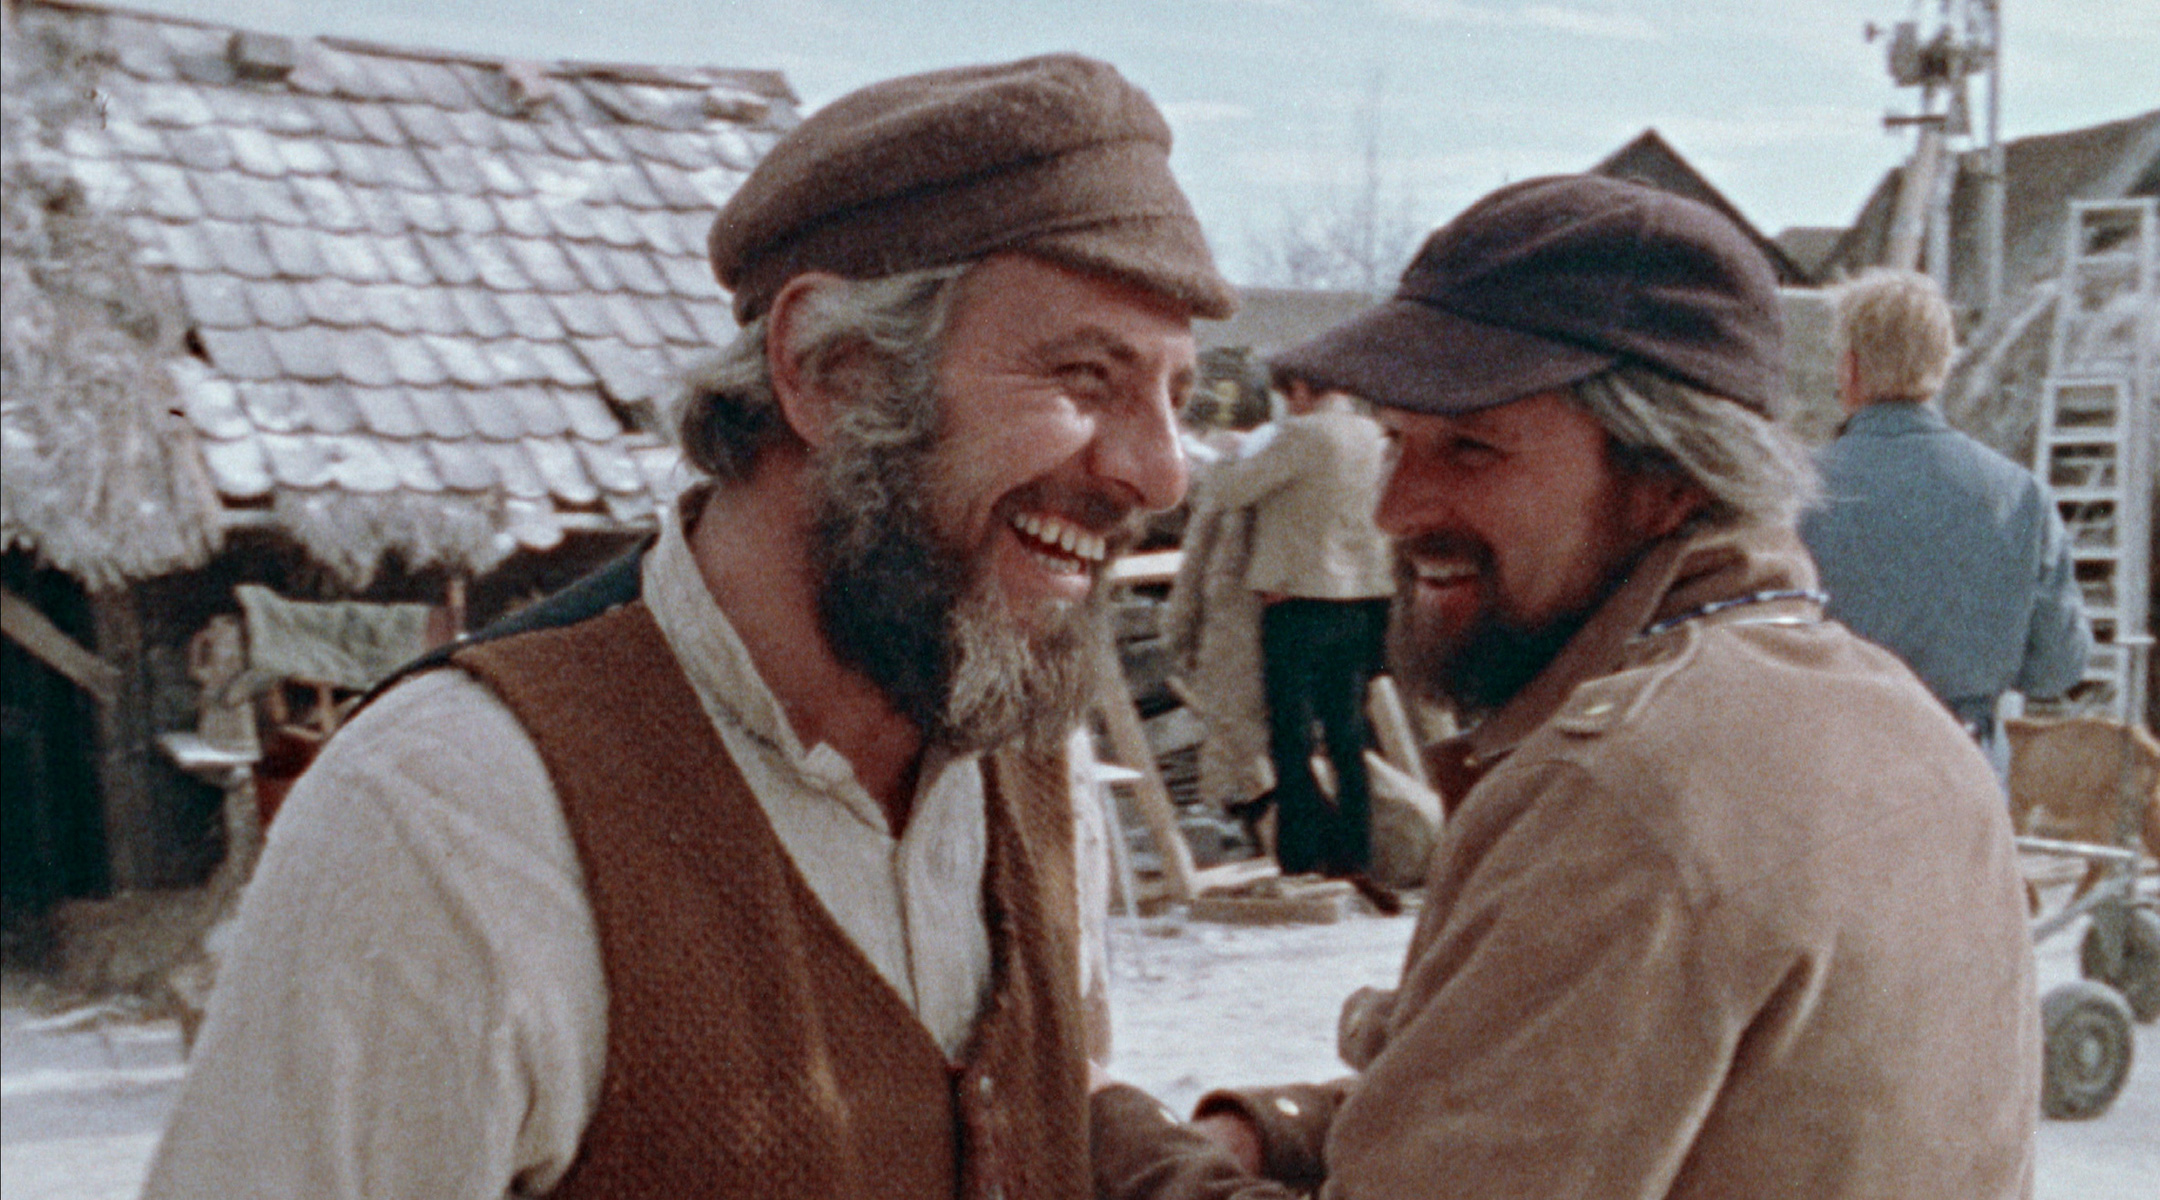 Director Norman Jewison, right, and star Topol as Tevye on the set of the film version of “Fiddler on the Roof.” (Zeitgeist Films in association with Kino Lorber)